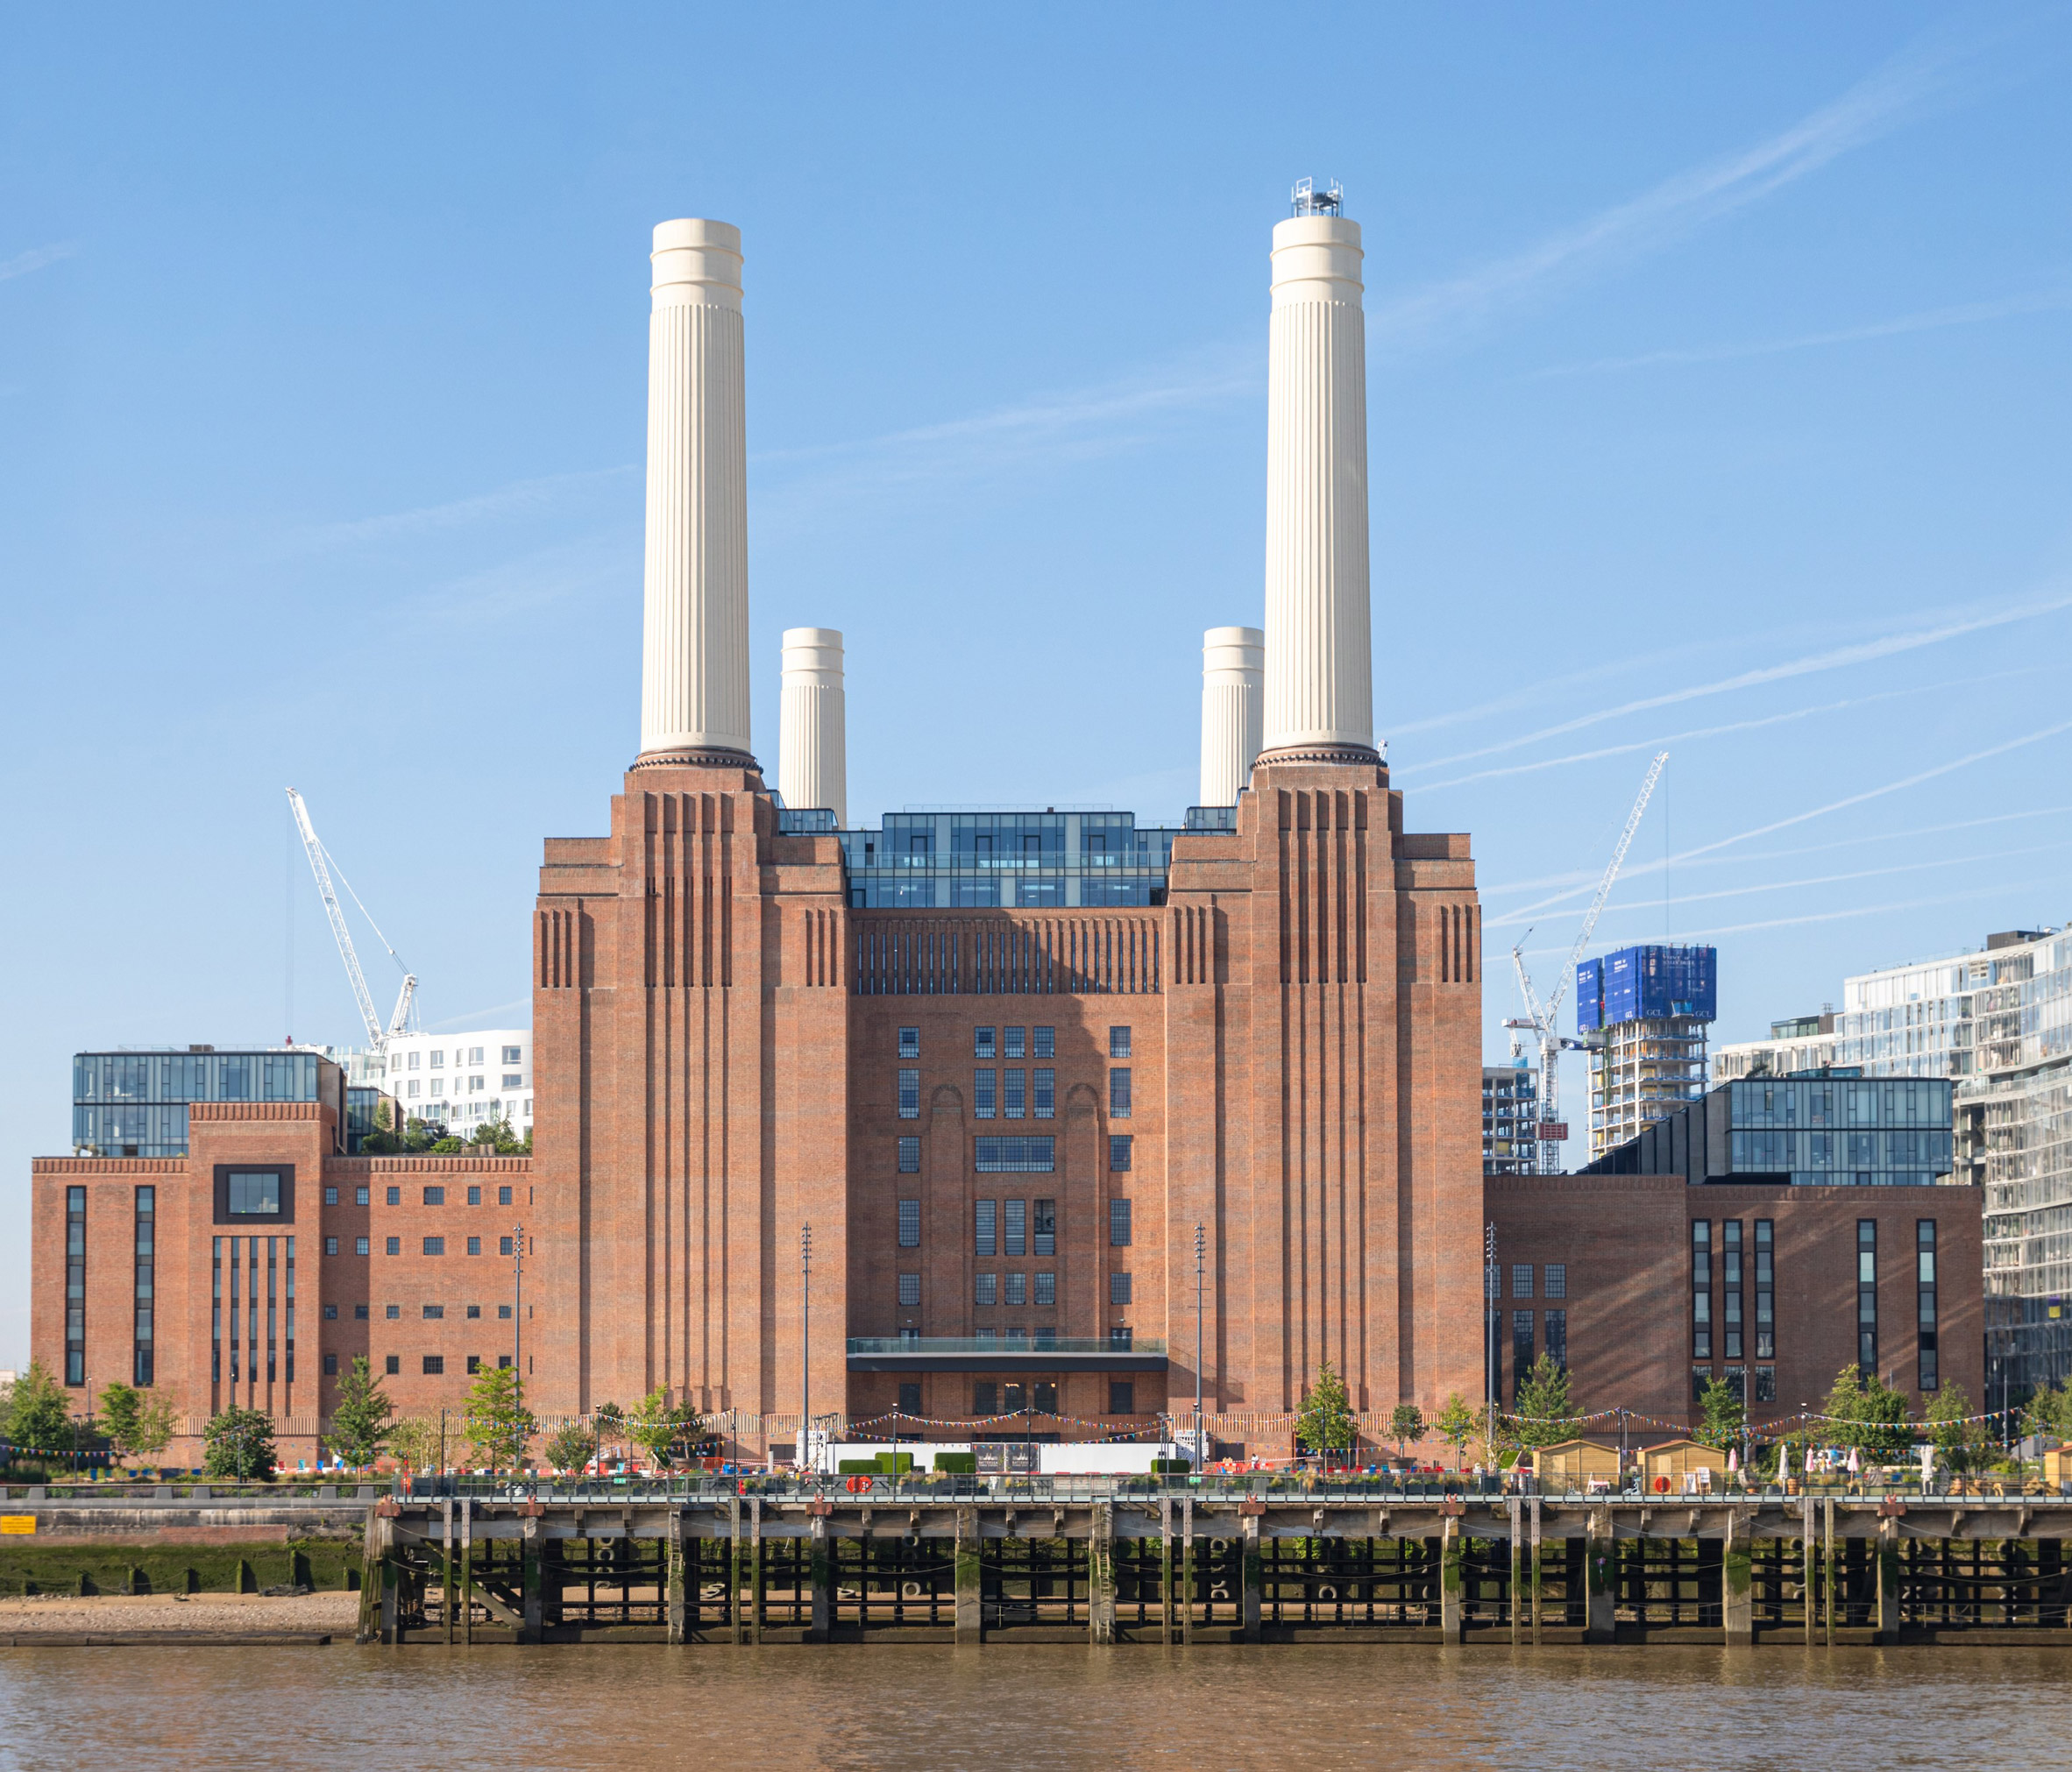 Iconic Battersea Power Station